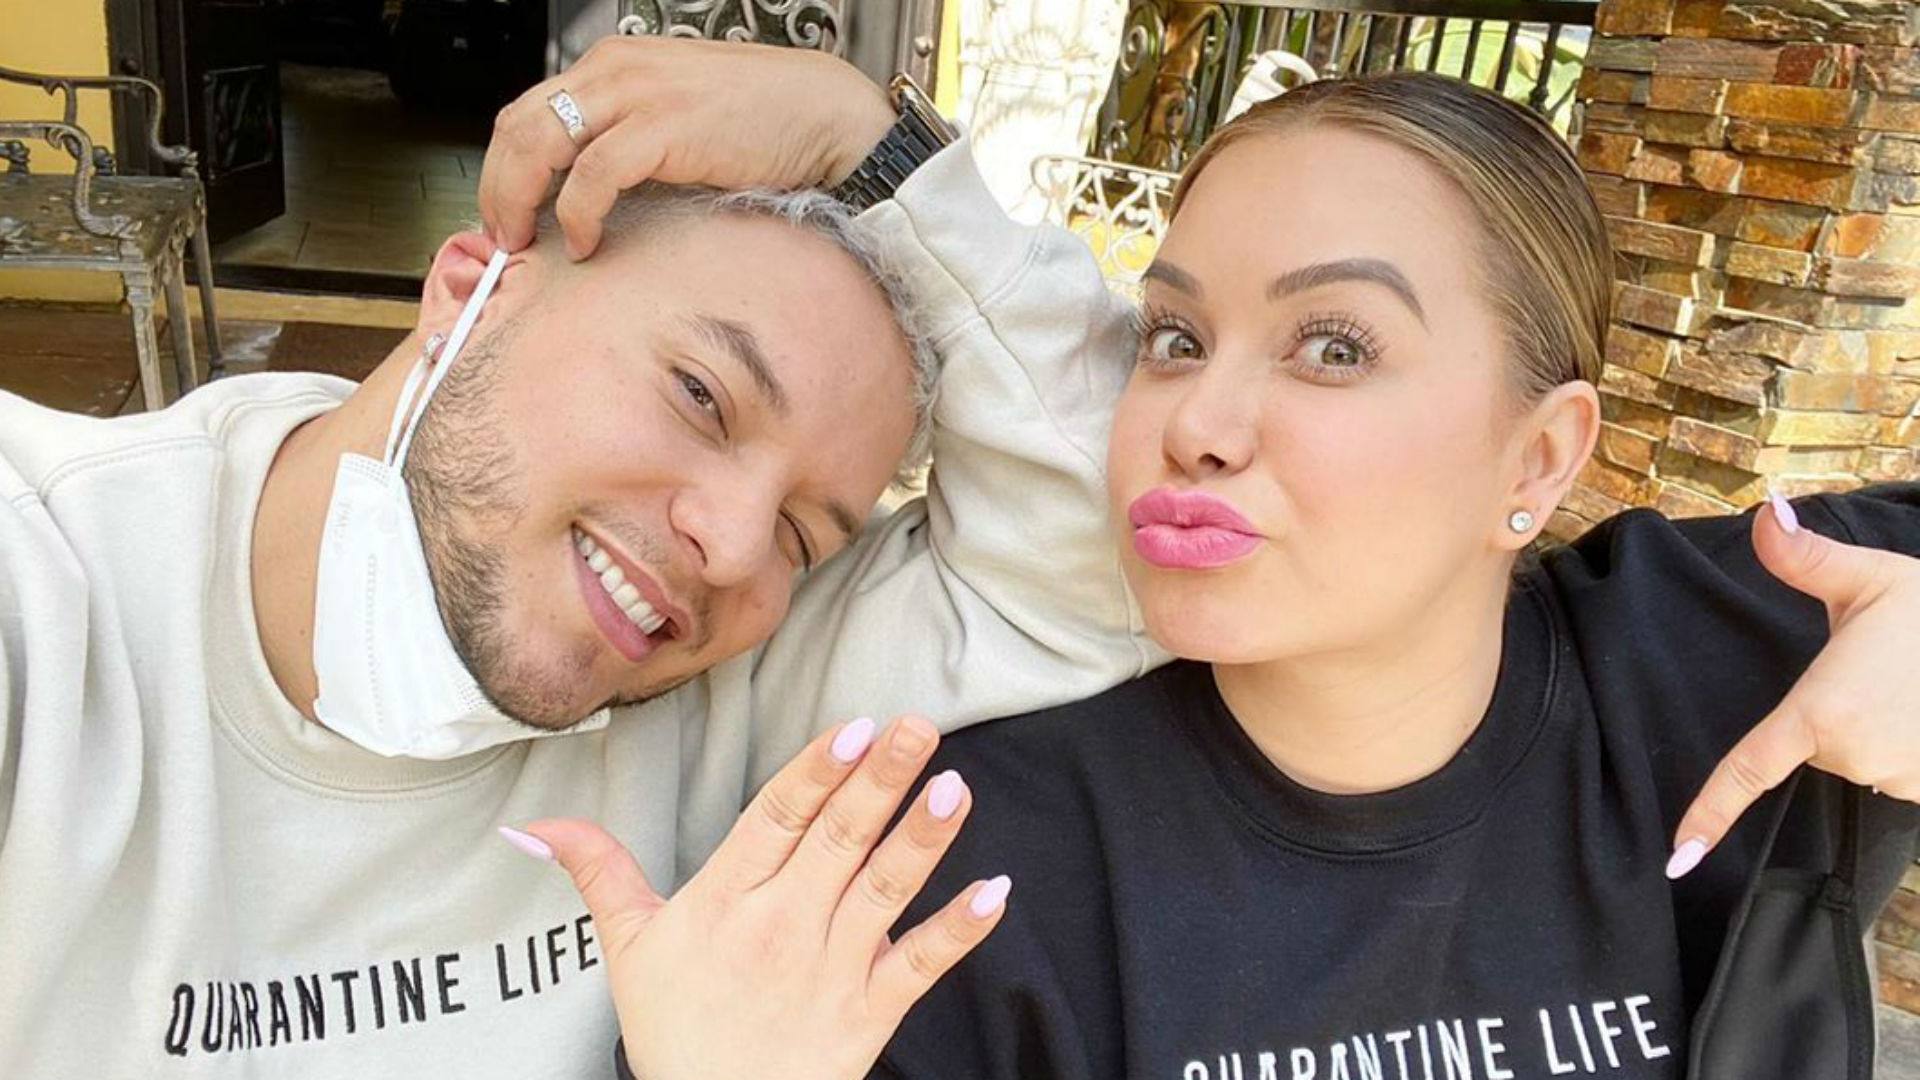 Chiquis Rivera announced that she and Lorenzo Méndez have coronaviruses, af...